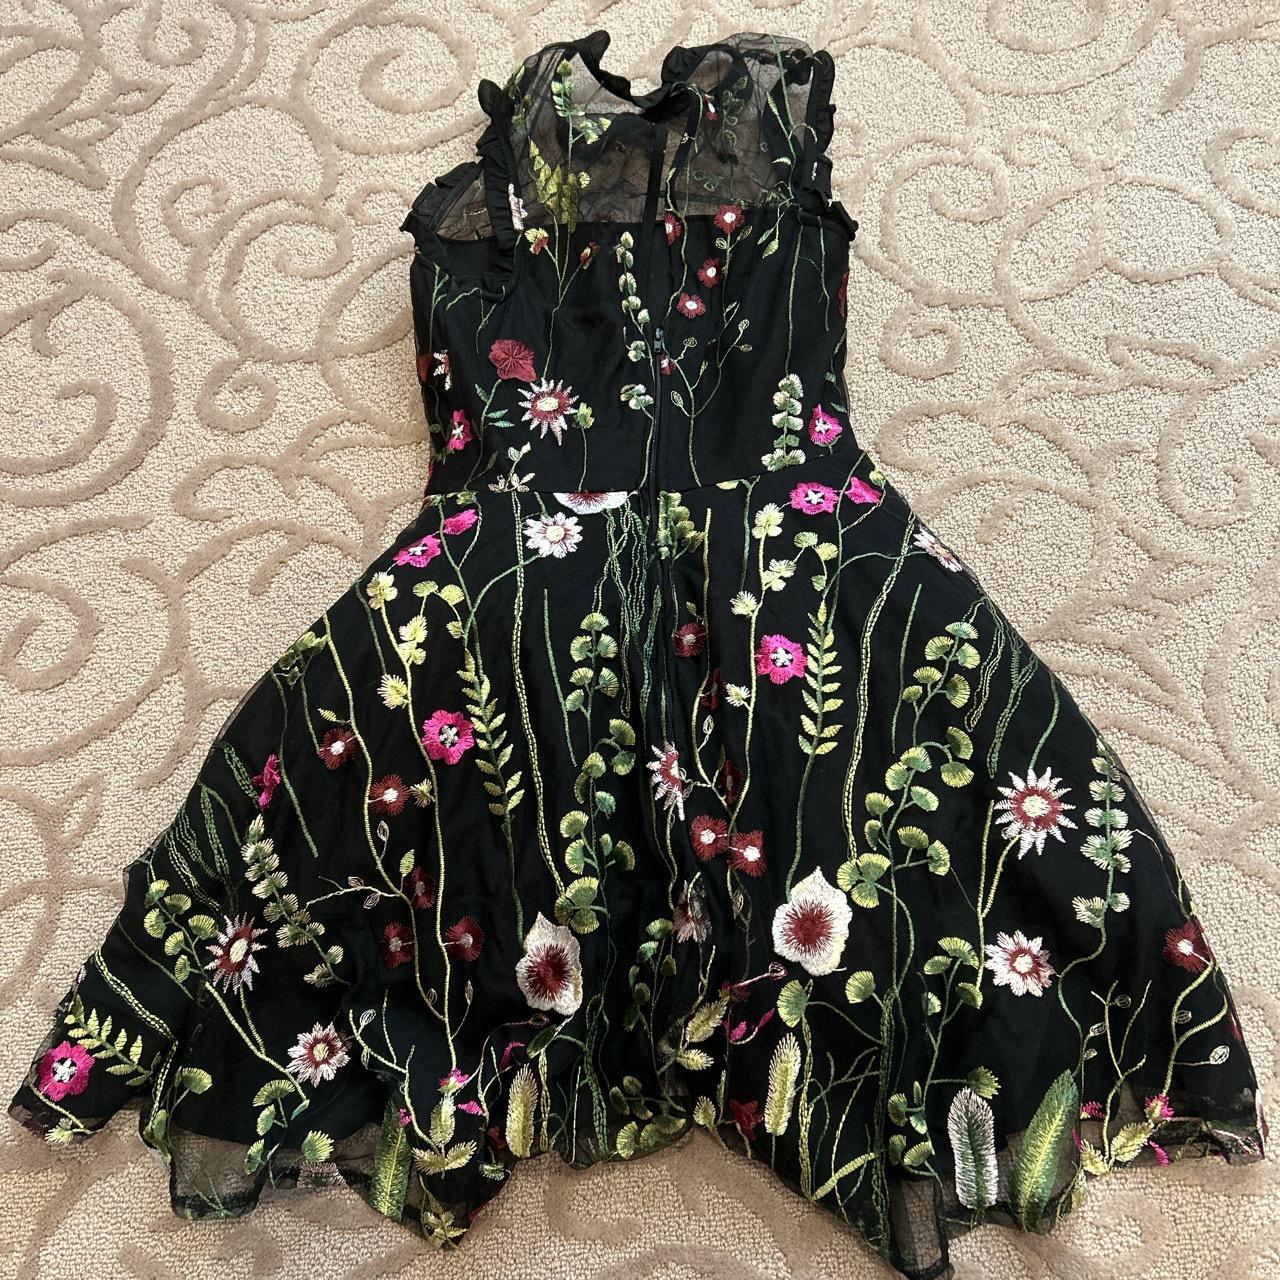 J. Jill Women's Size Small Floral Embroidered Black - Depop